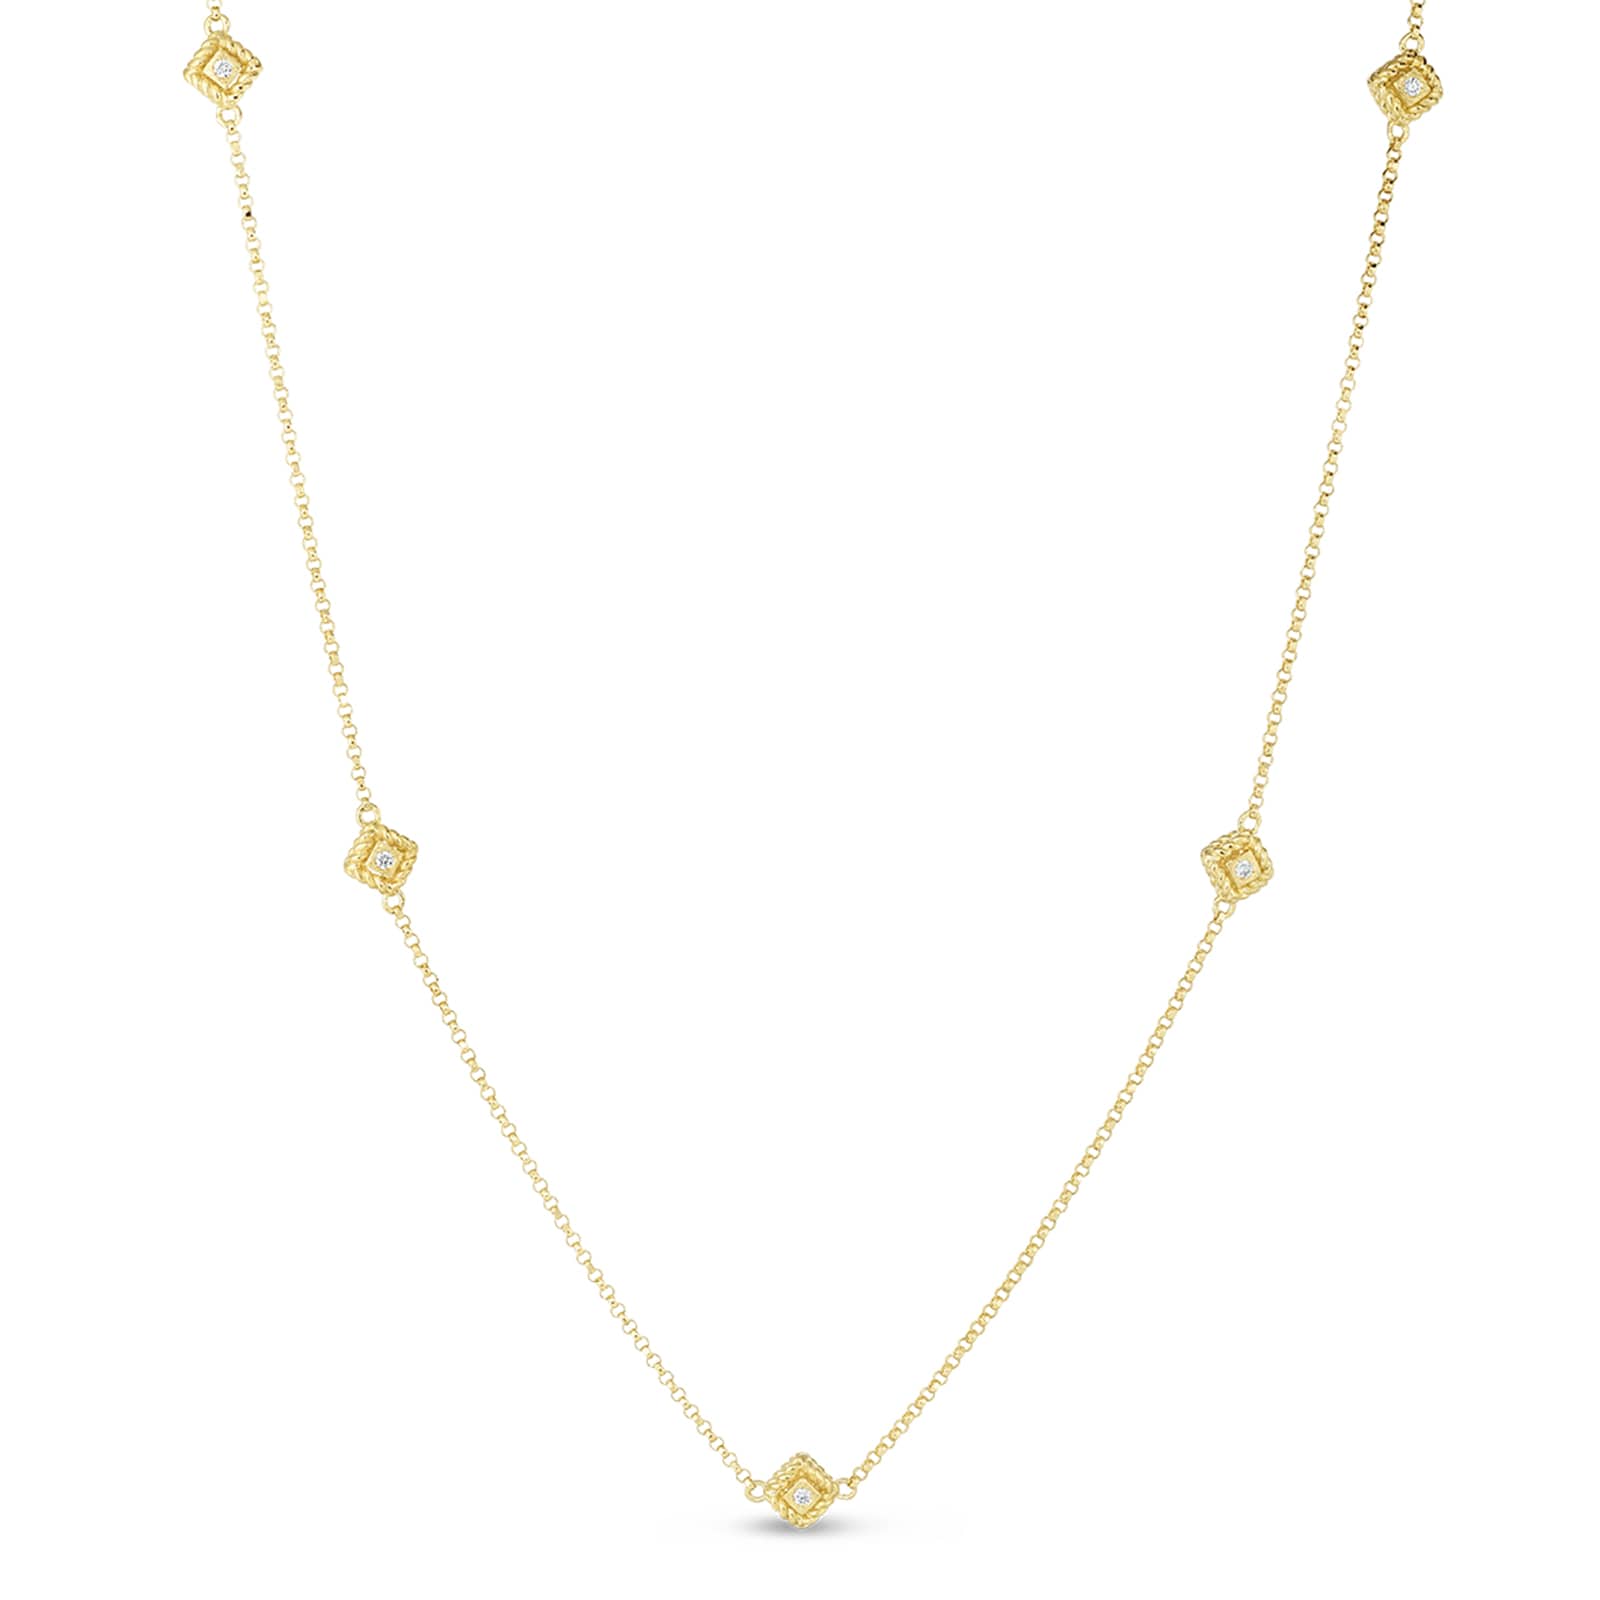 18K Diamonds BY The Inch 5 Station Necklace BY Roberto Coin -  PDRC-7773261AW17X